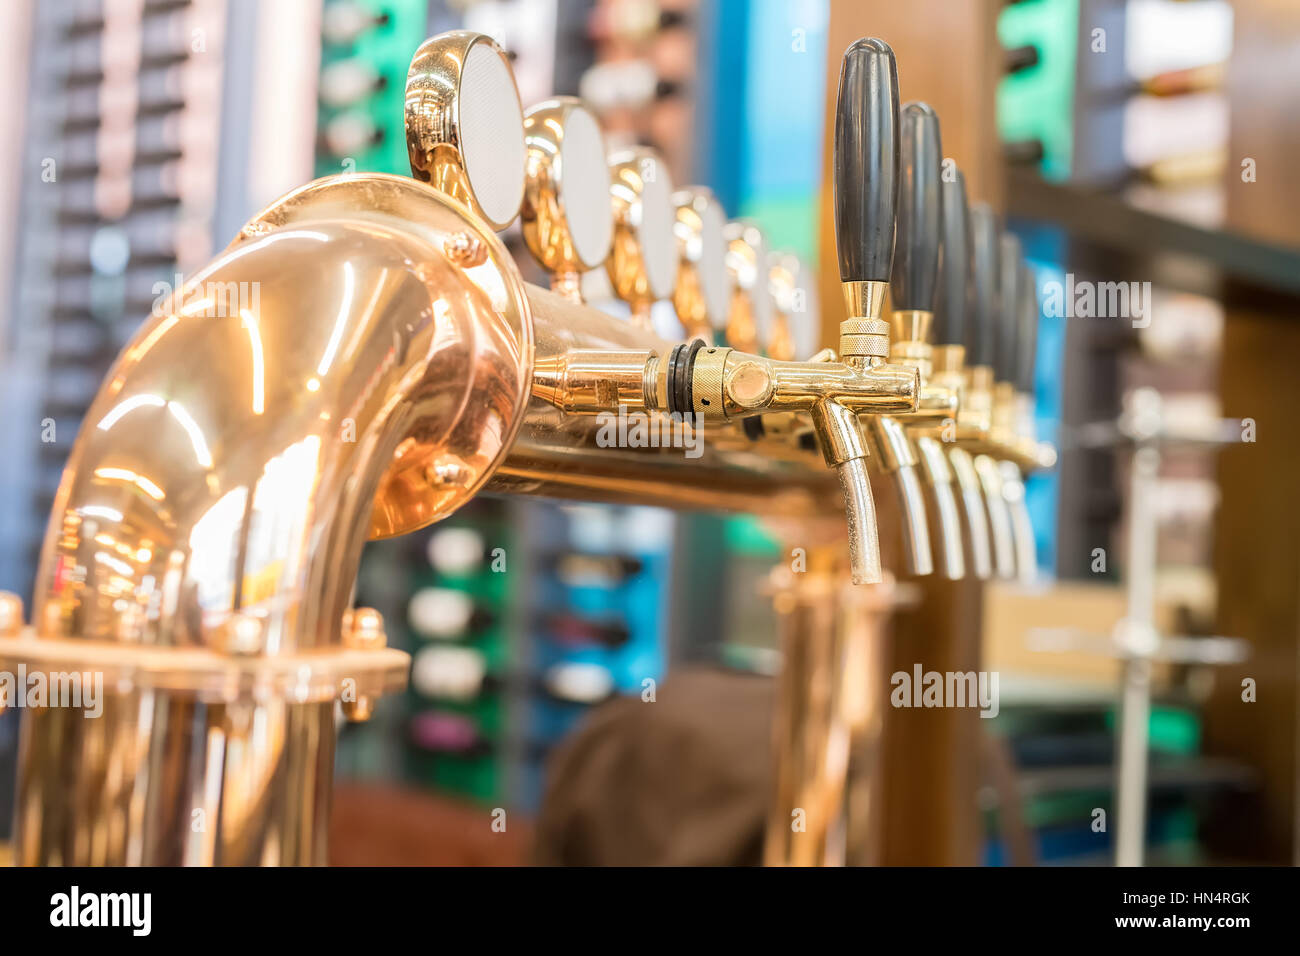 Draught beer taps in a bar. Stock Photo